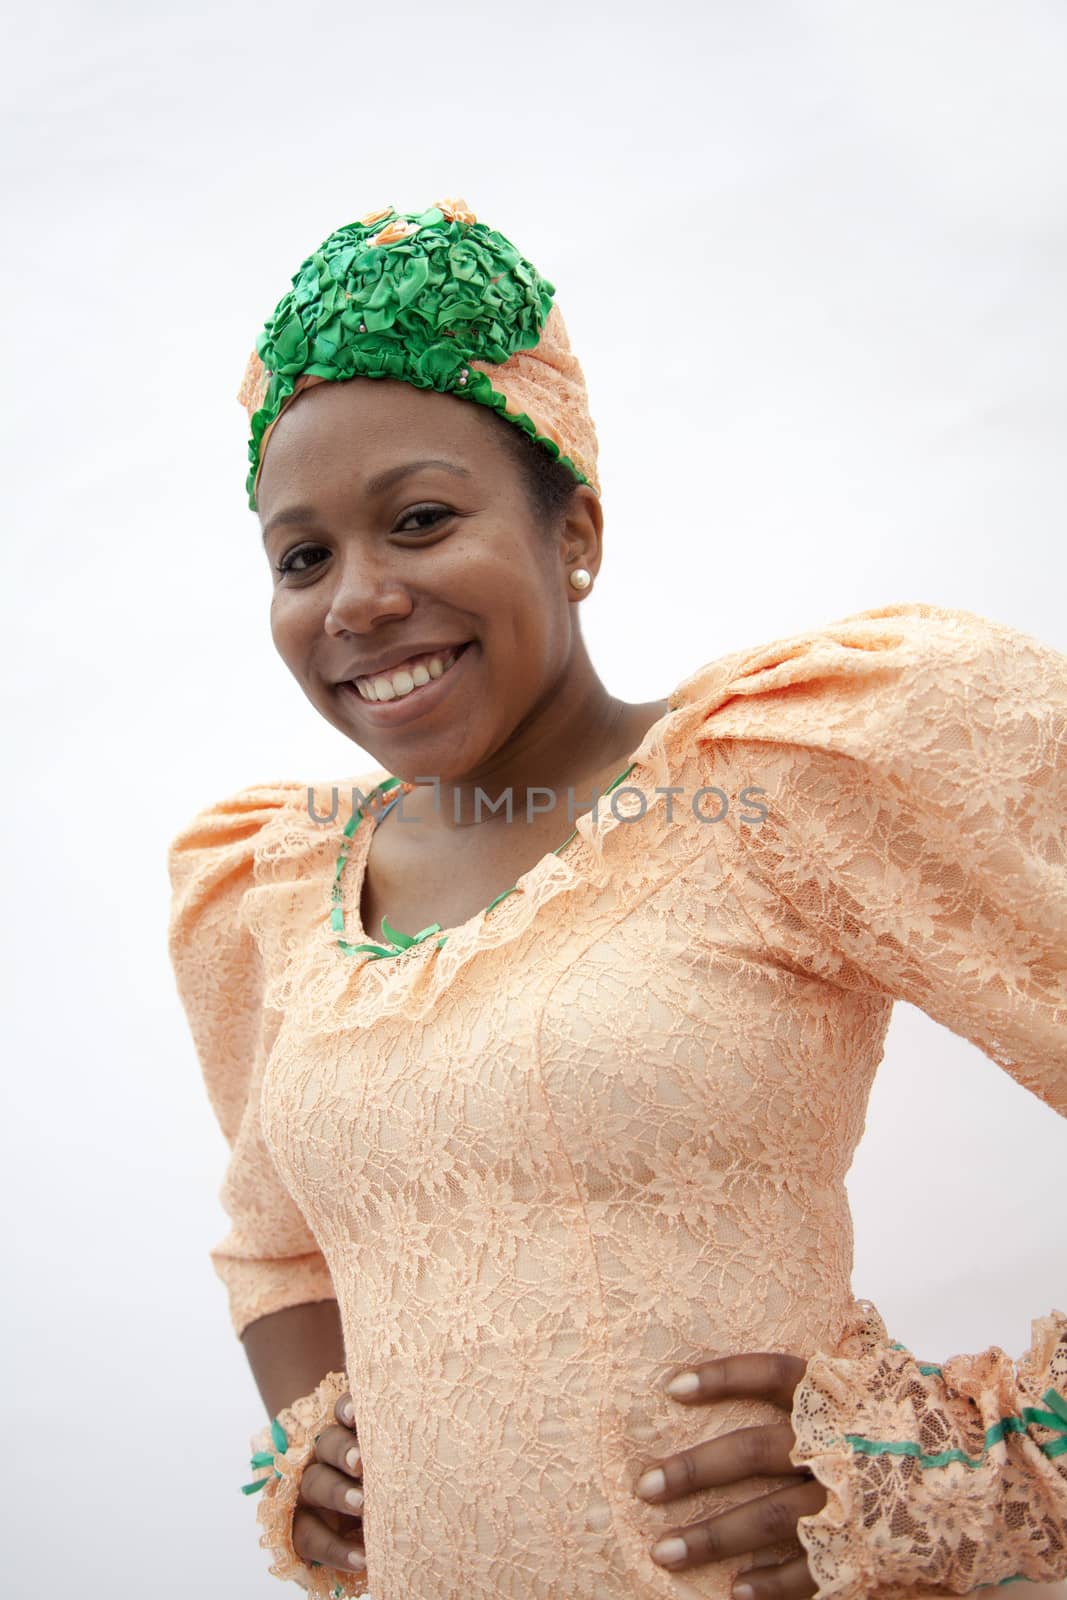 Portrait of young smiling  woman with hands on hips in traditional clothing from the Caribbean, studio shot